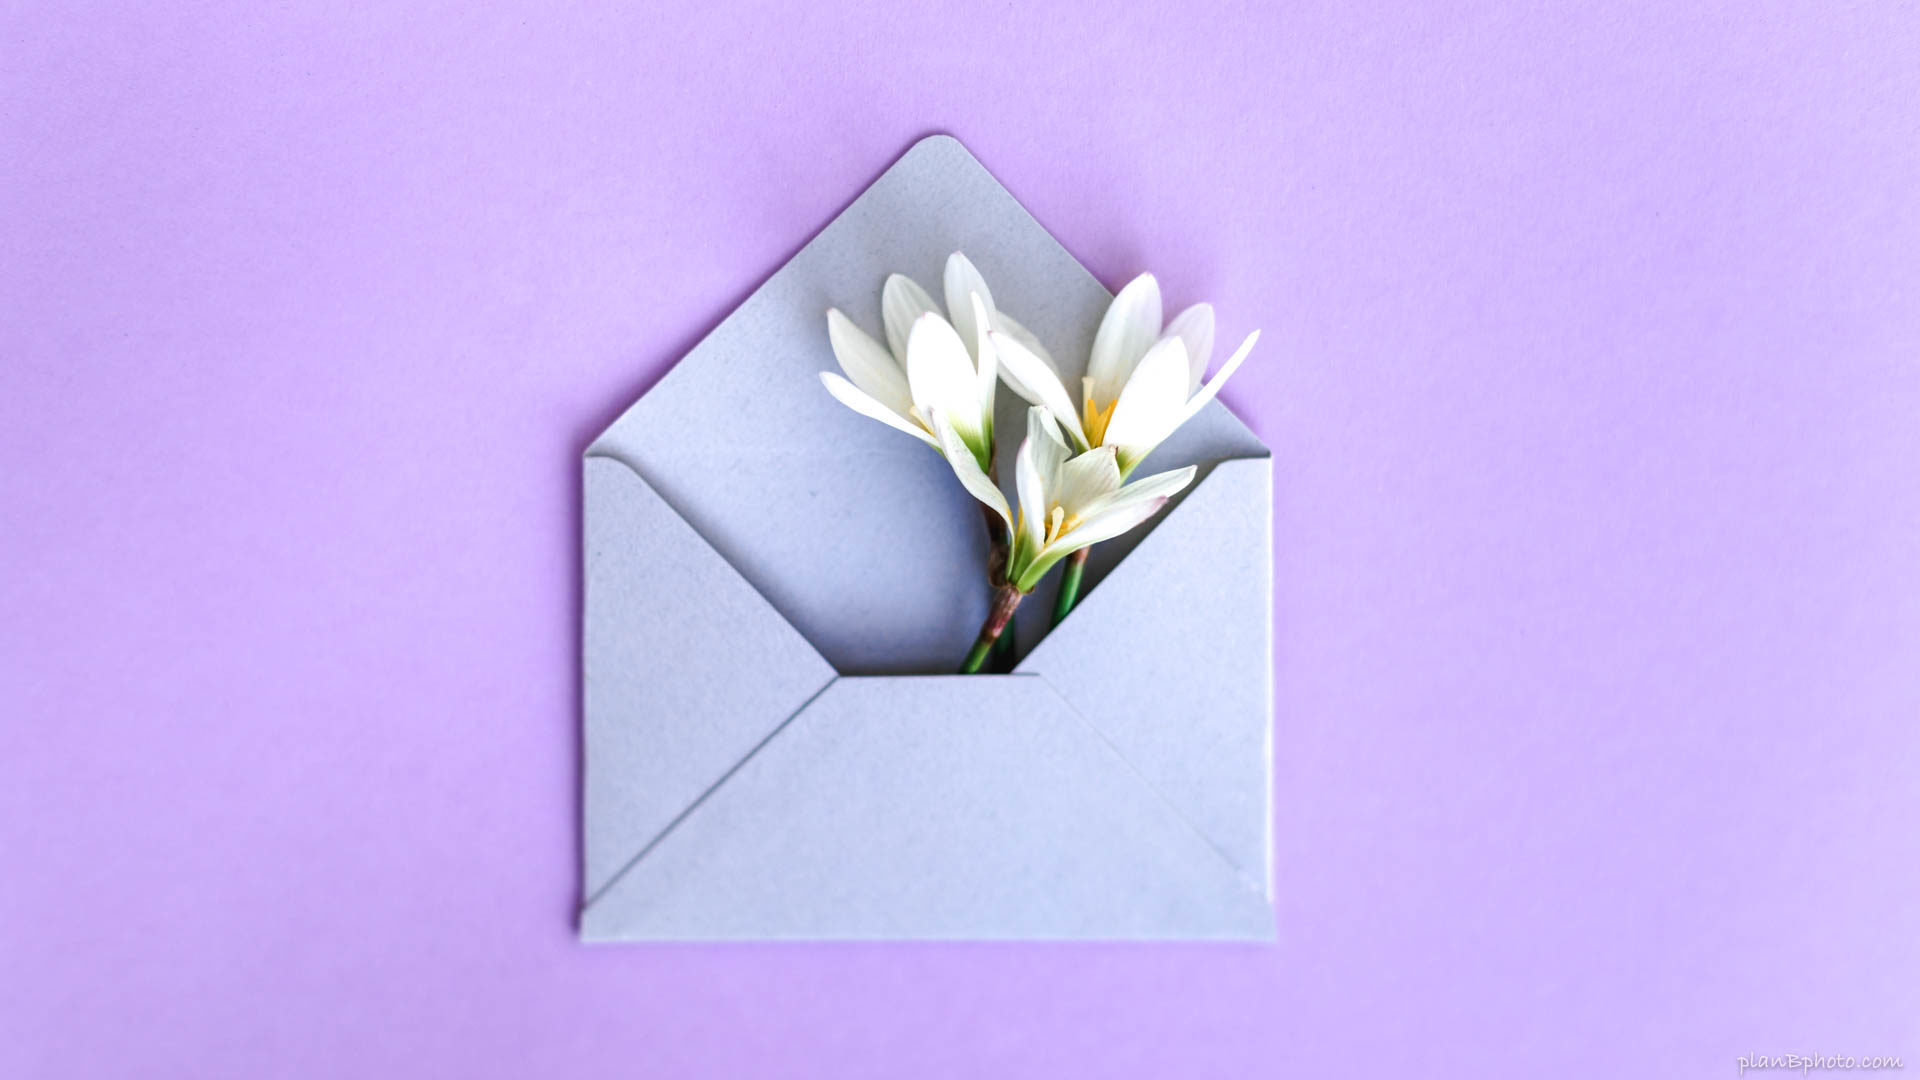 Three white flowers in a grey envelope on a lilac background